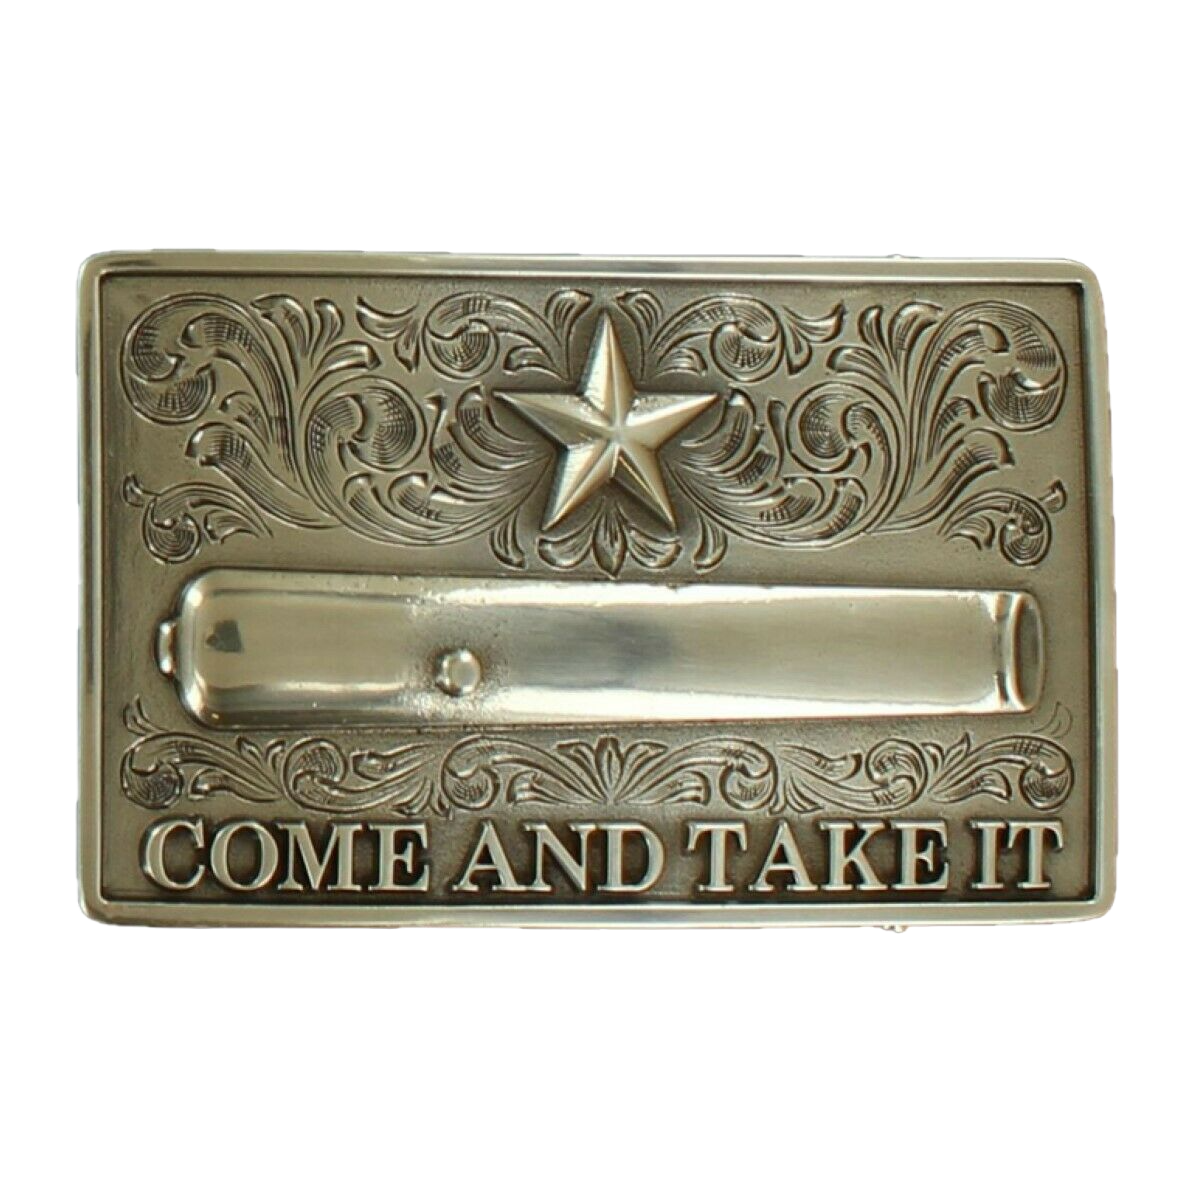 Nocona Gold-Toned "Come and take it" Canon Belt Buckle 37103